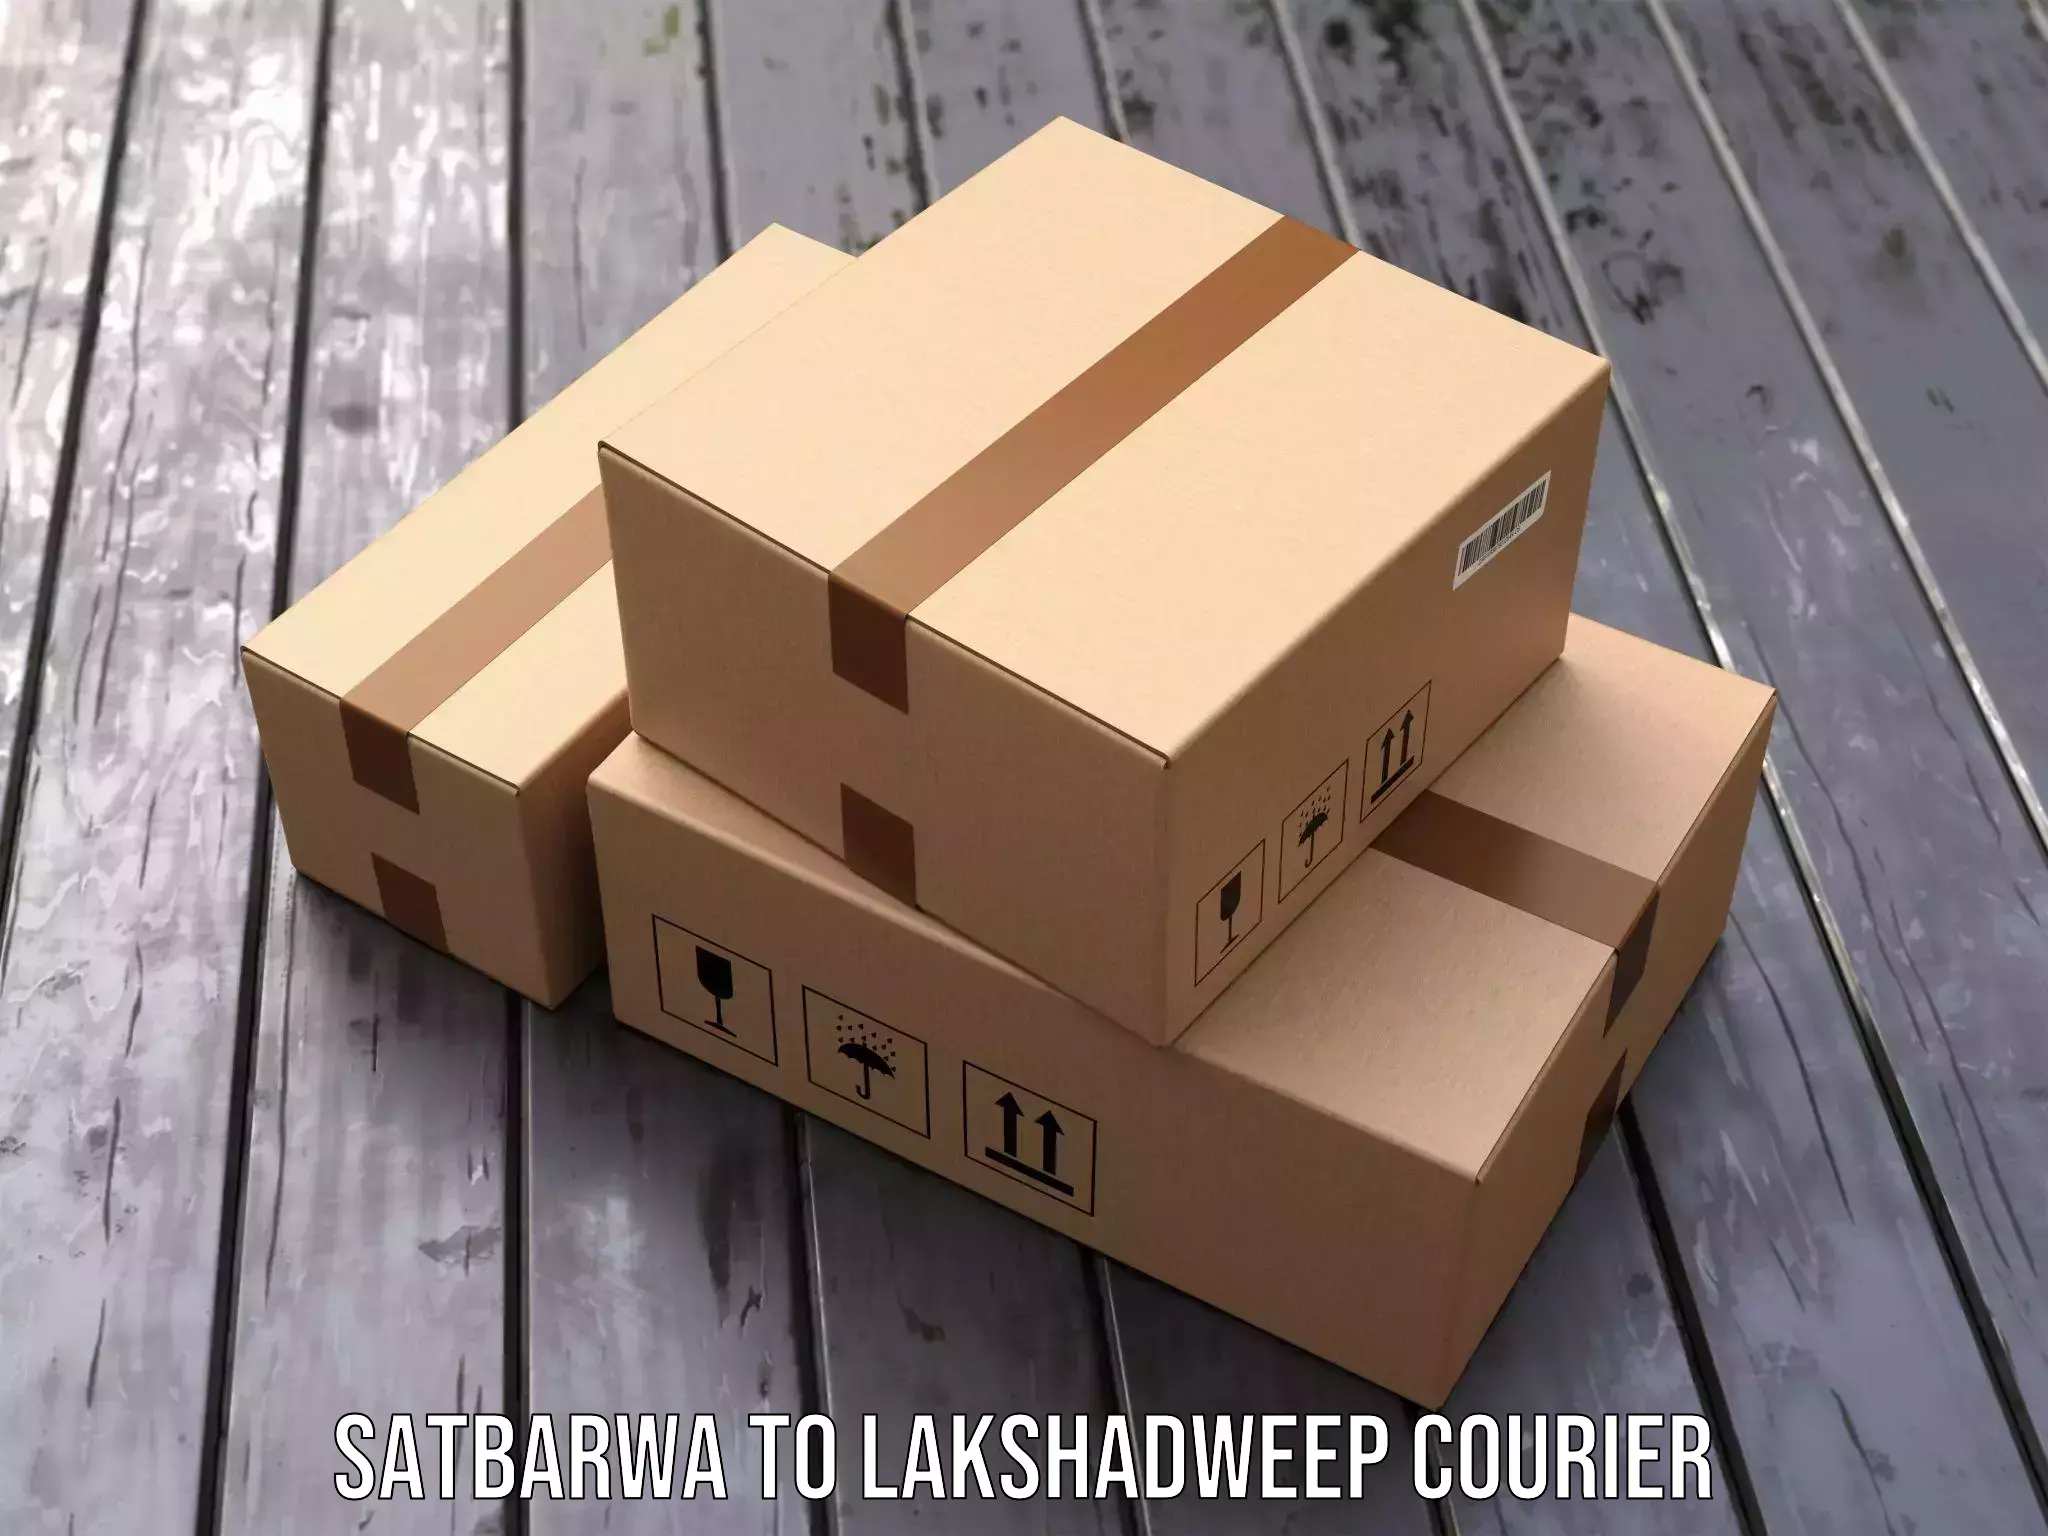 State-of-the-art courier technology Satbarwa to Lakshadweep